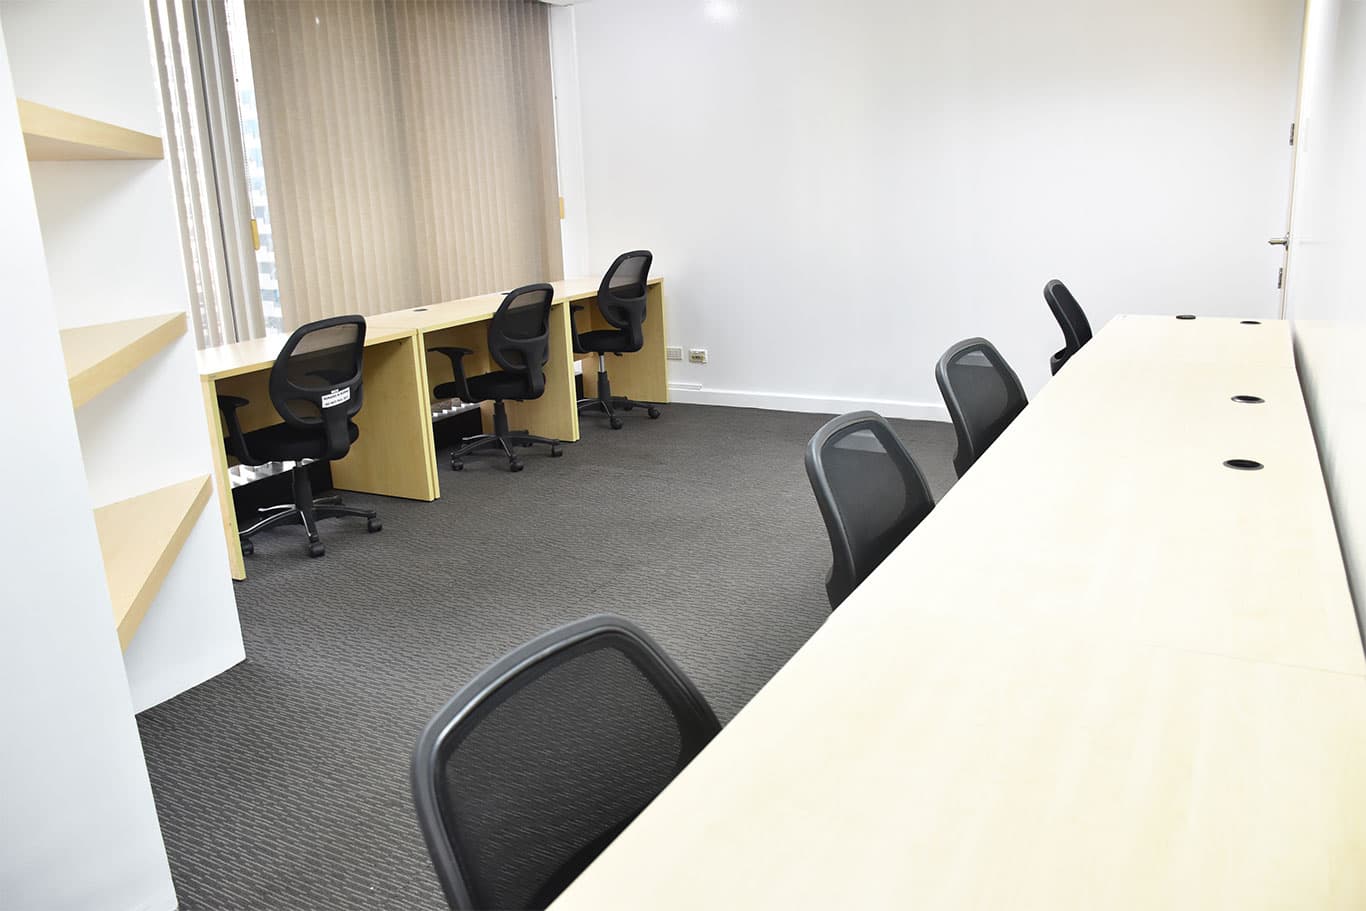 KMC Private Office Space for rent in Rufino Pacific Tower, Makati City, Manila, Philippines Image 3 - EpicSpace